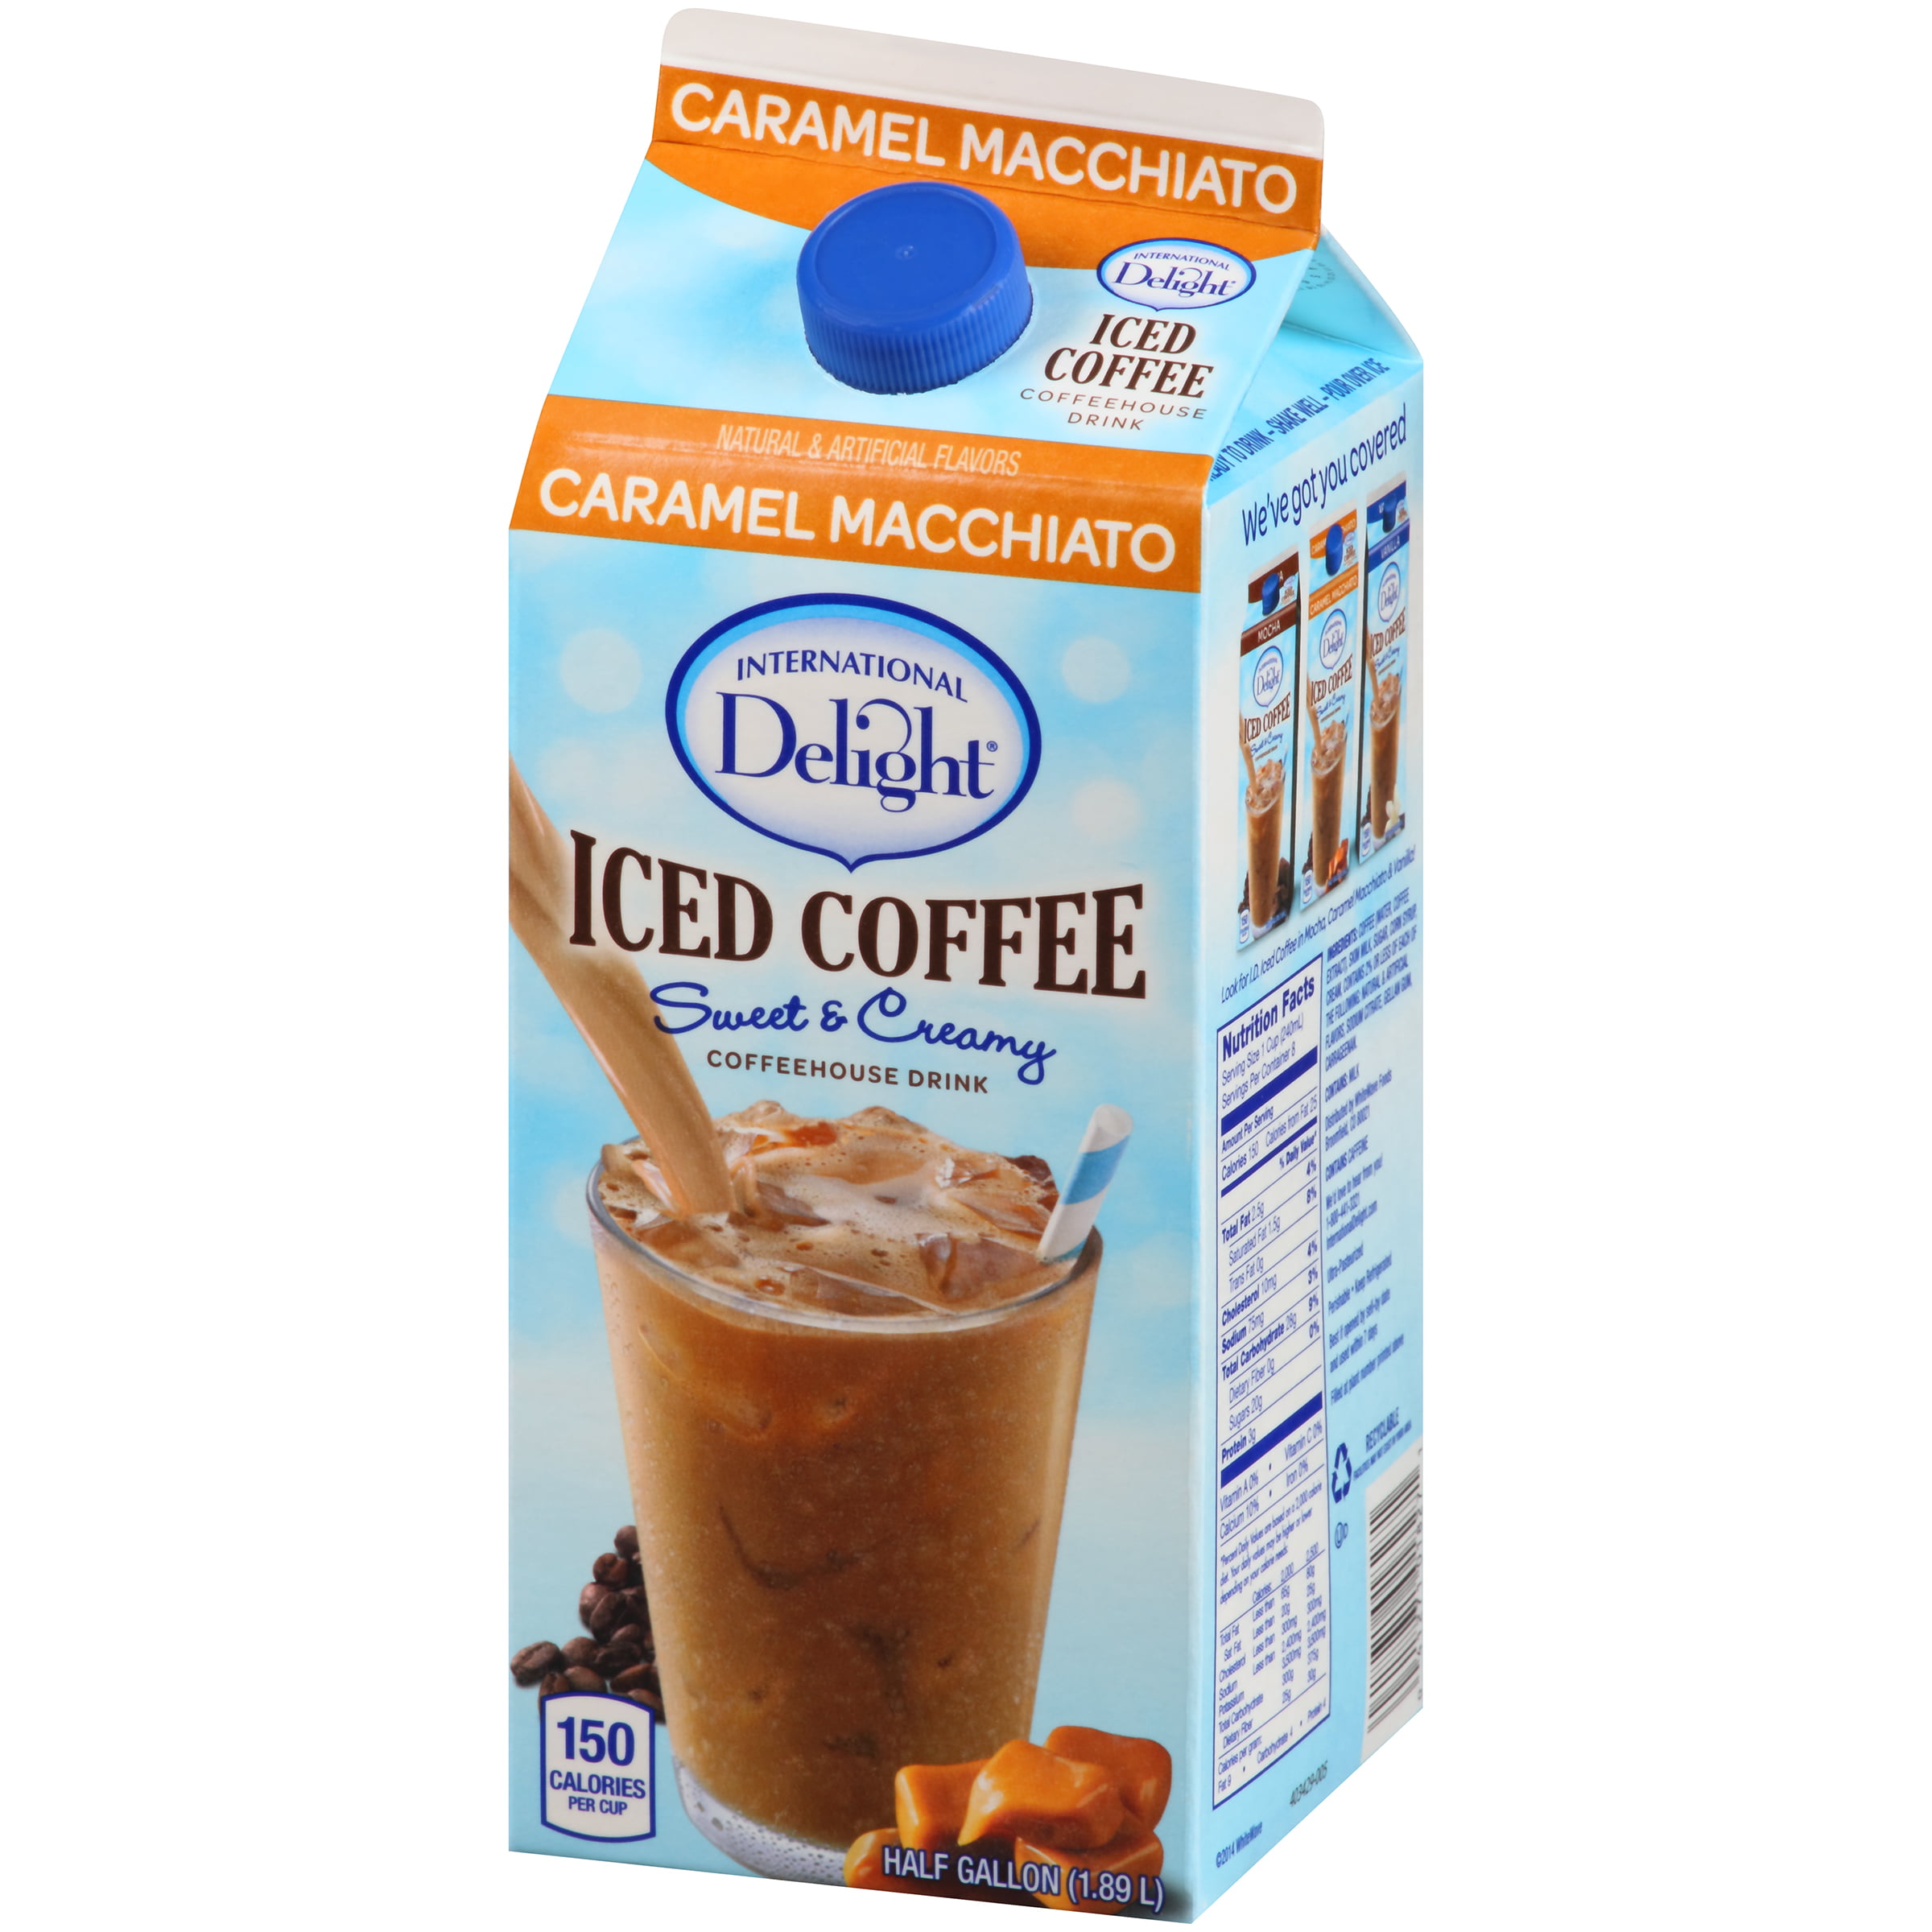 International Delight Original Iced Coffee Nutrition Facts ...